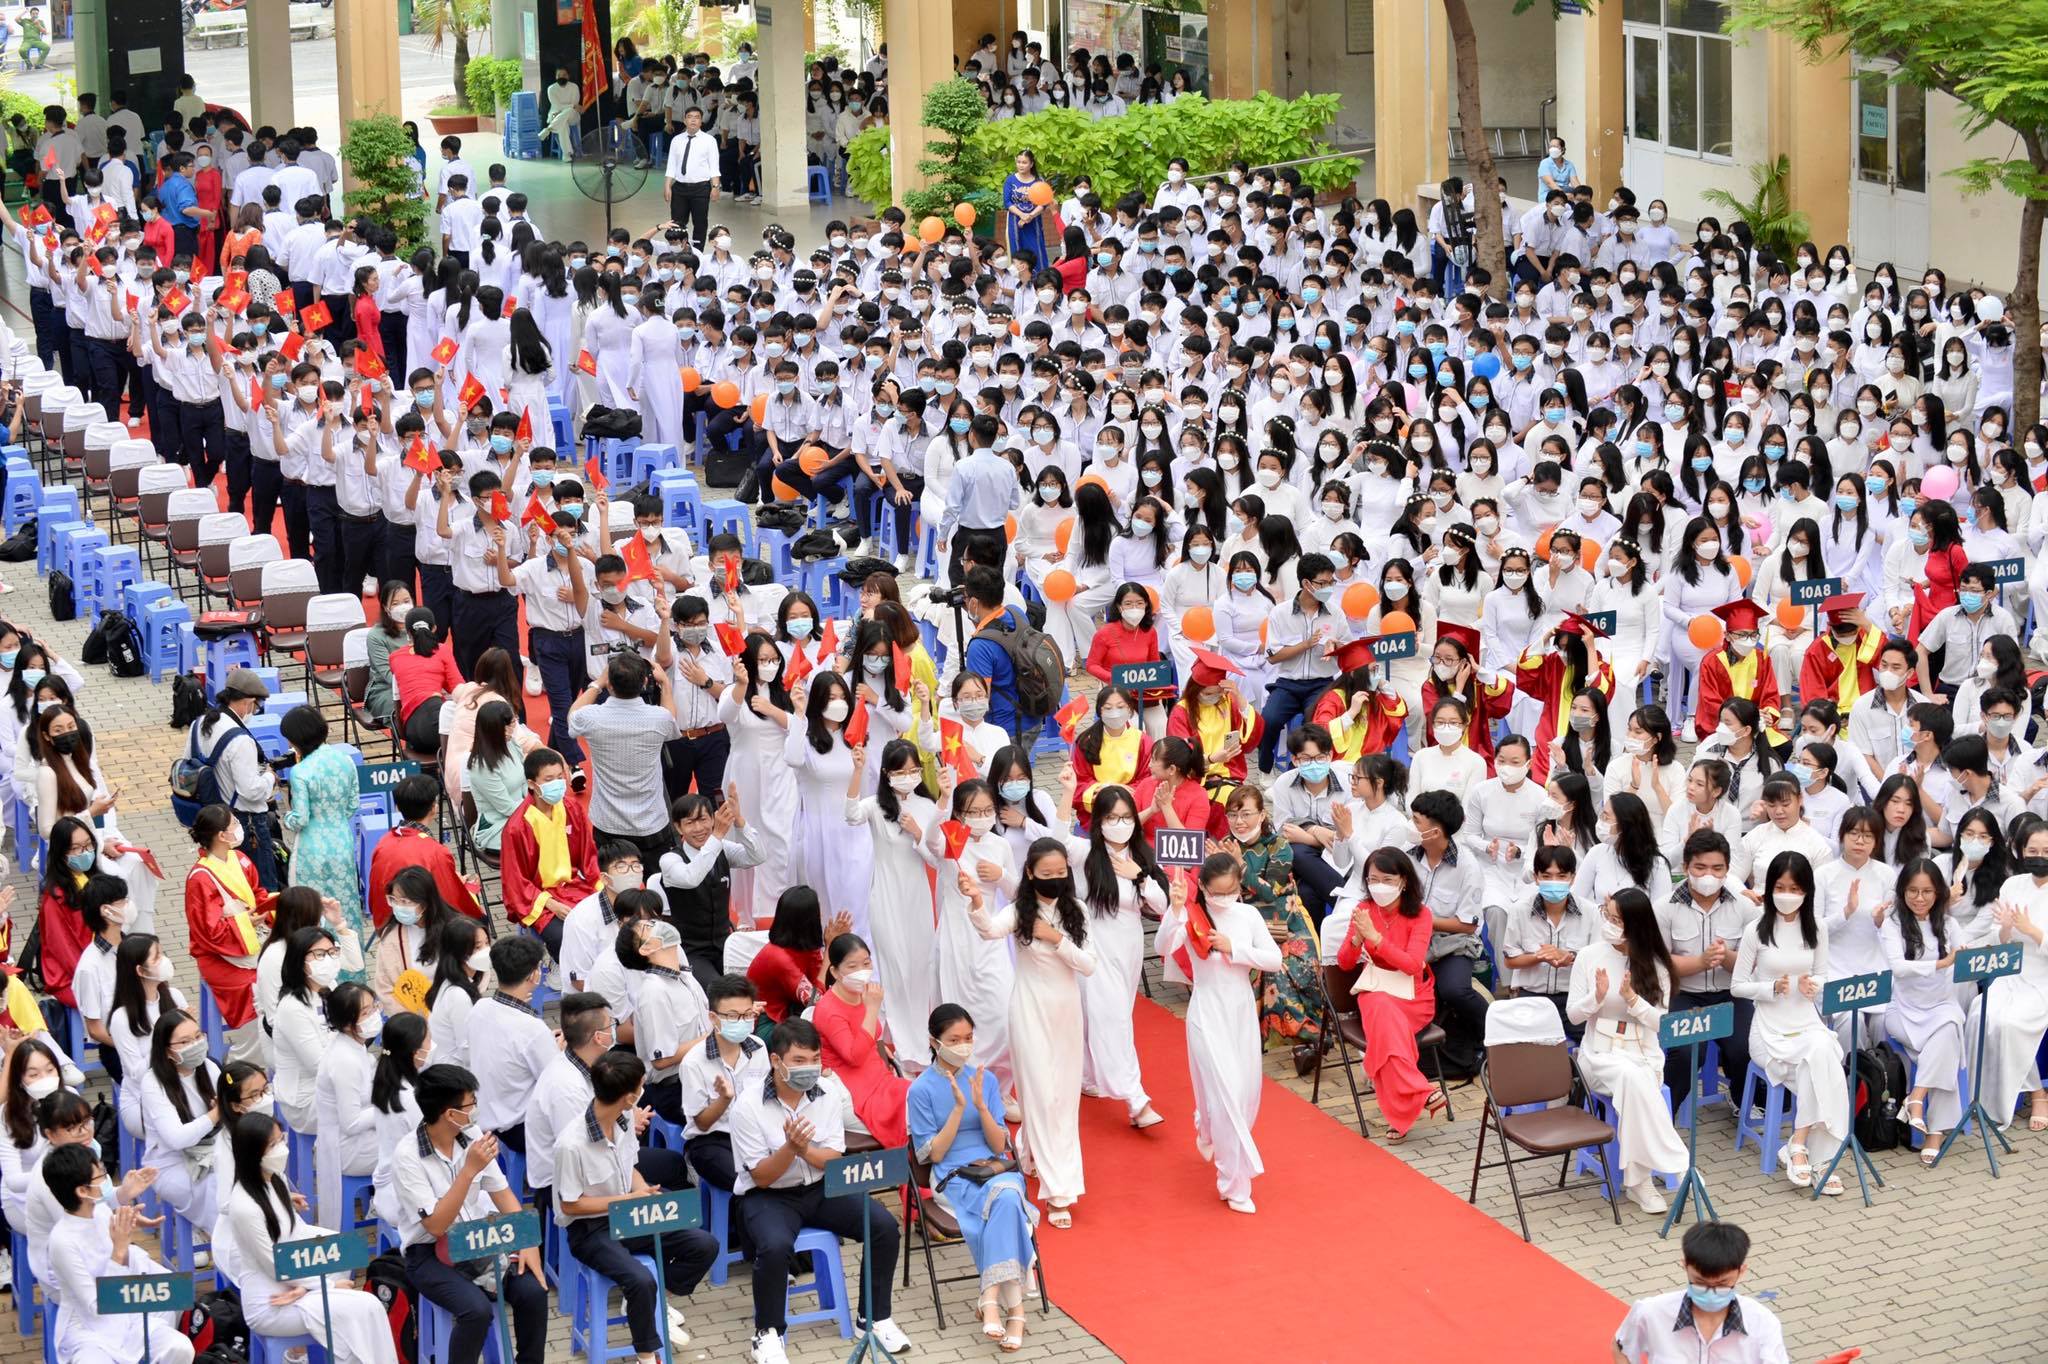 Students attend the school opening ceremony at Nguyen Tat Thanh High School in District 6, Ho Chi Minh City, September 5, 2022. Photo: T.T.D. / Tuoi Tre